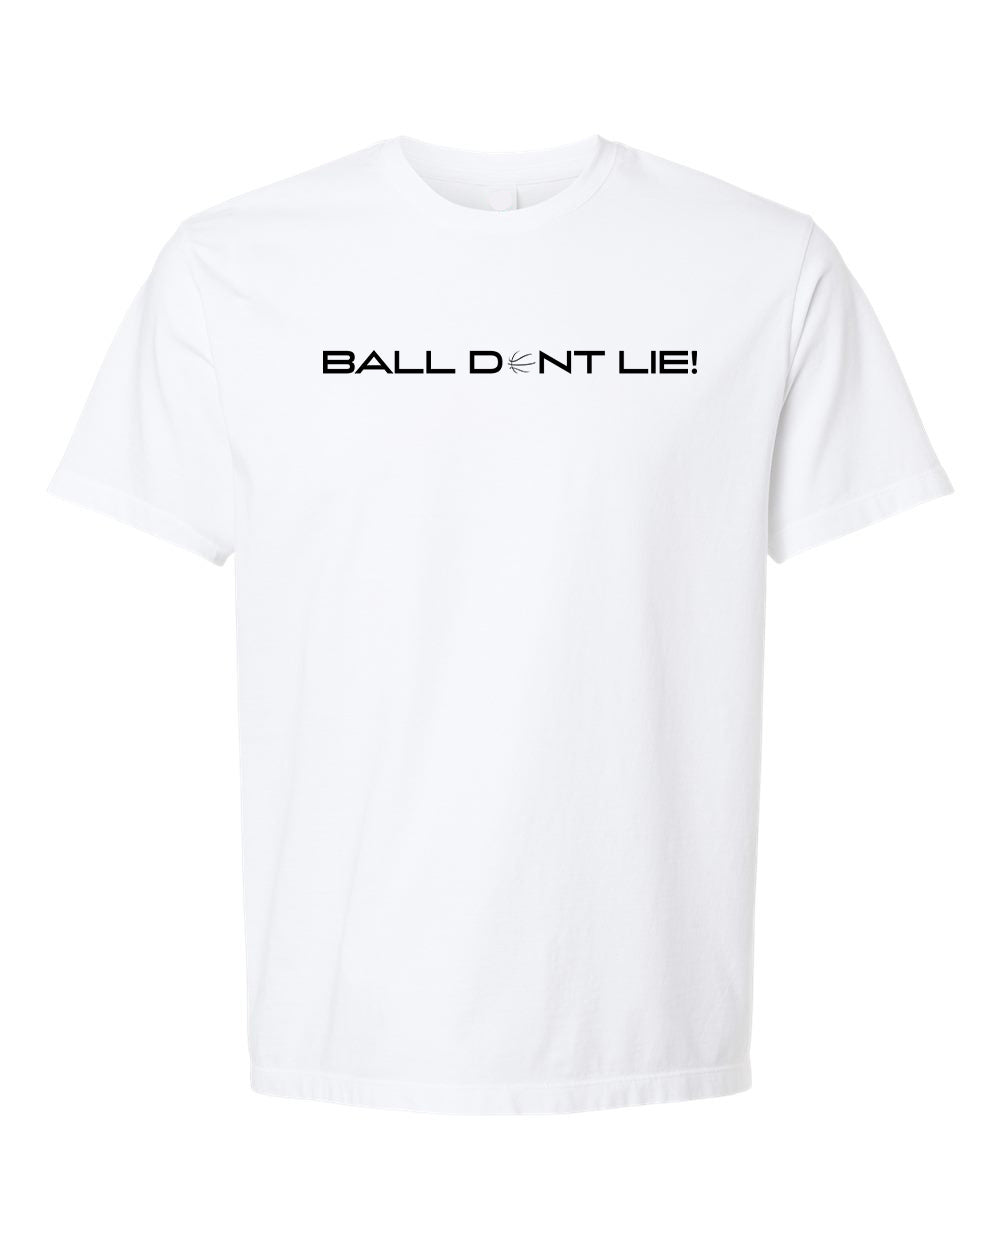 "BALL DON'T LIE!" Adult Tee (color options available)